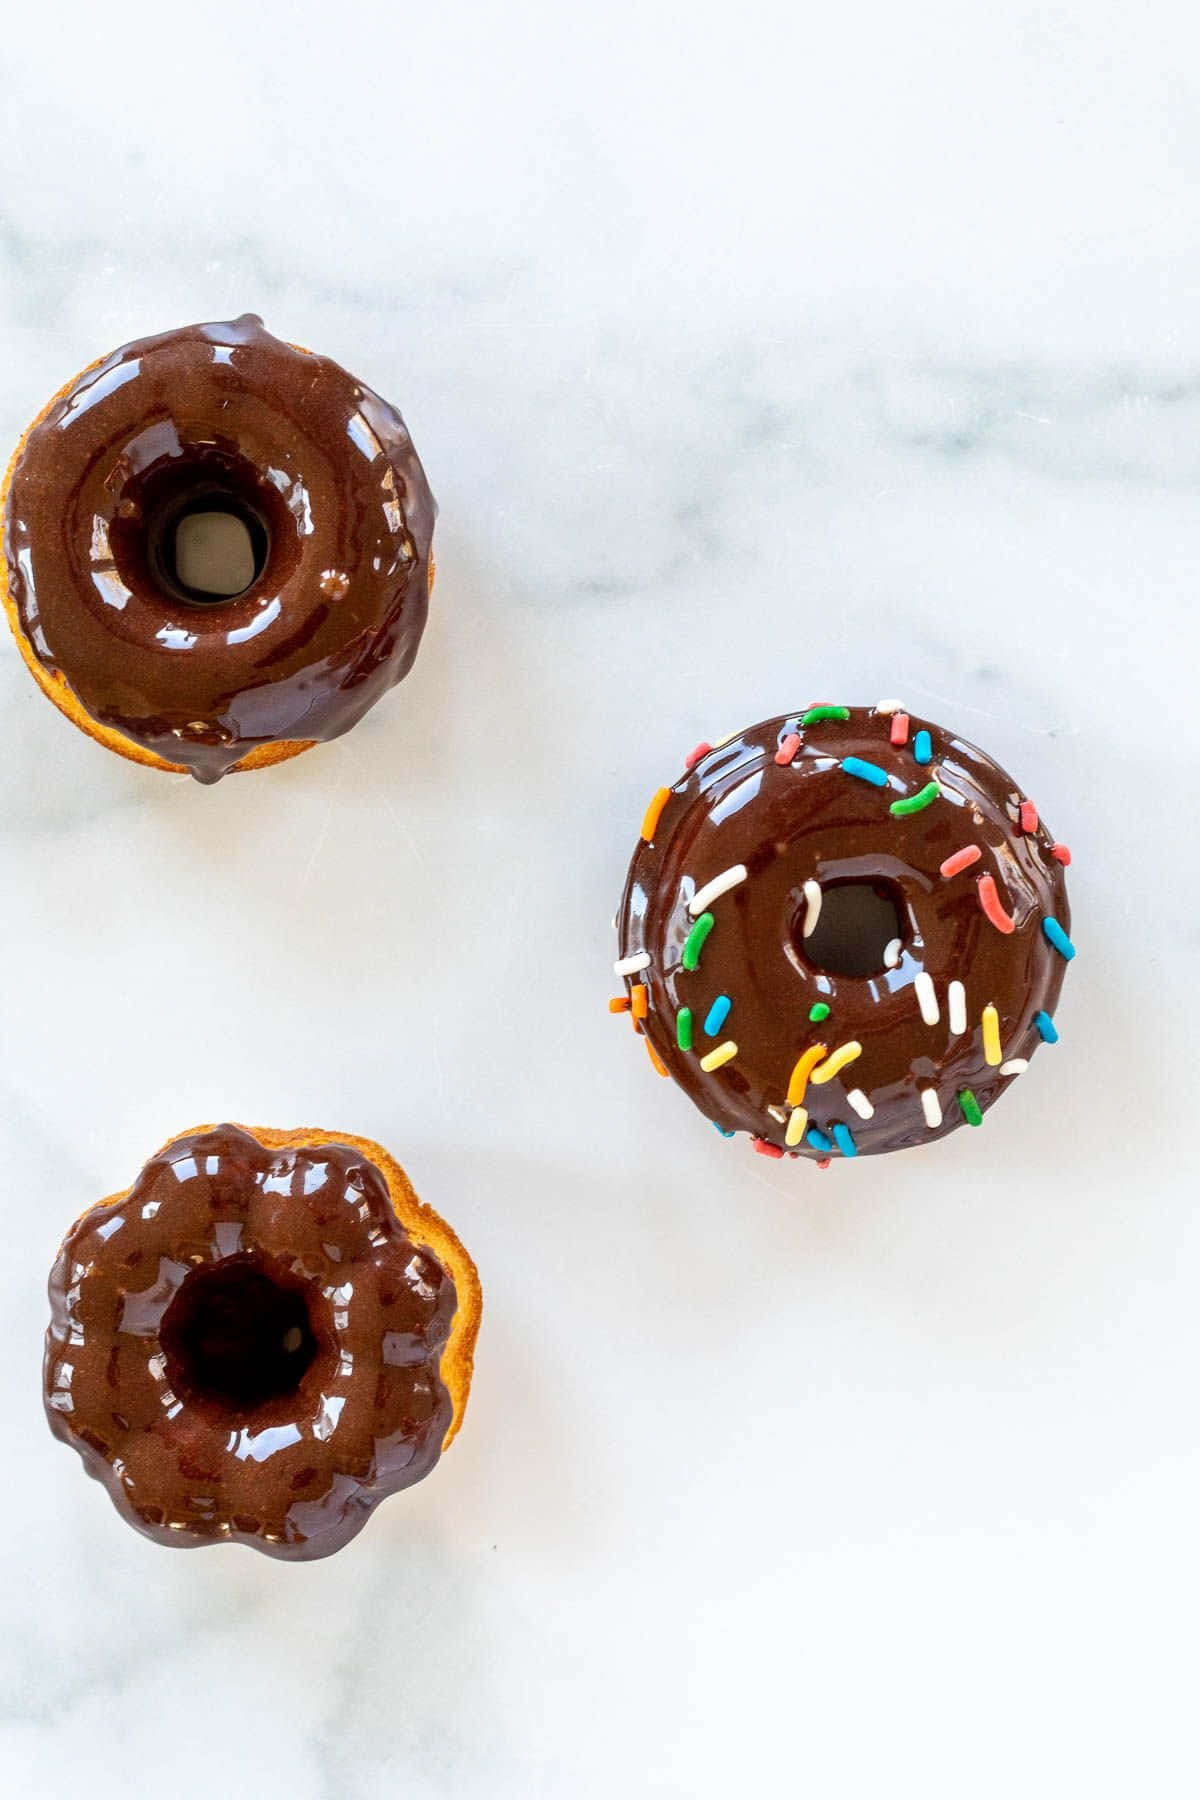 Bite into delicious donuts for the perfect snack!